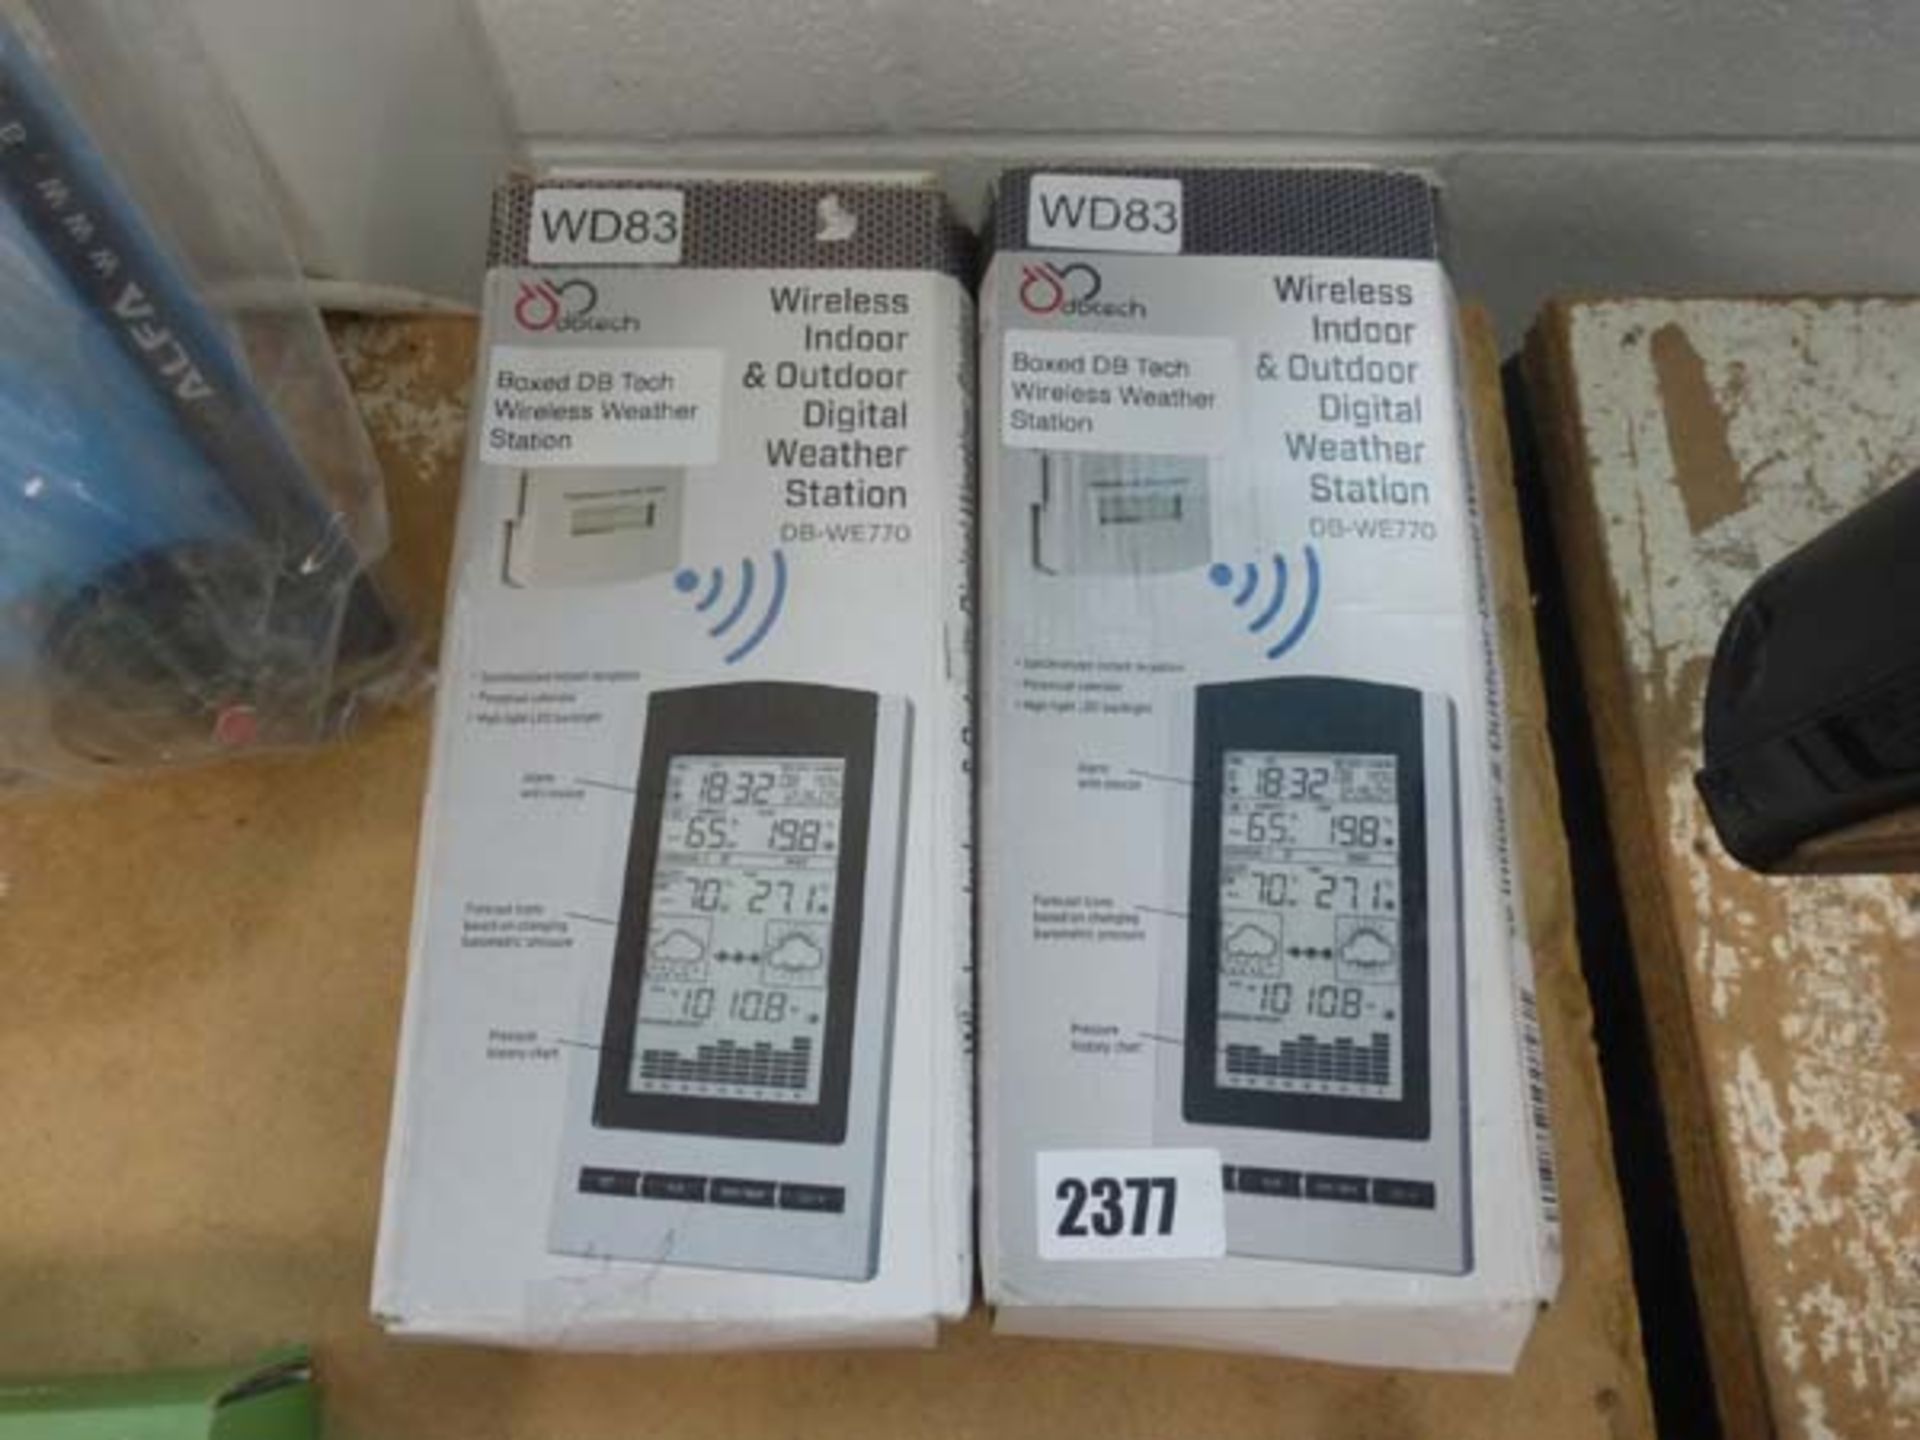 2 boxed DB Tech wireless weather stations